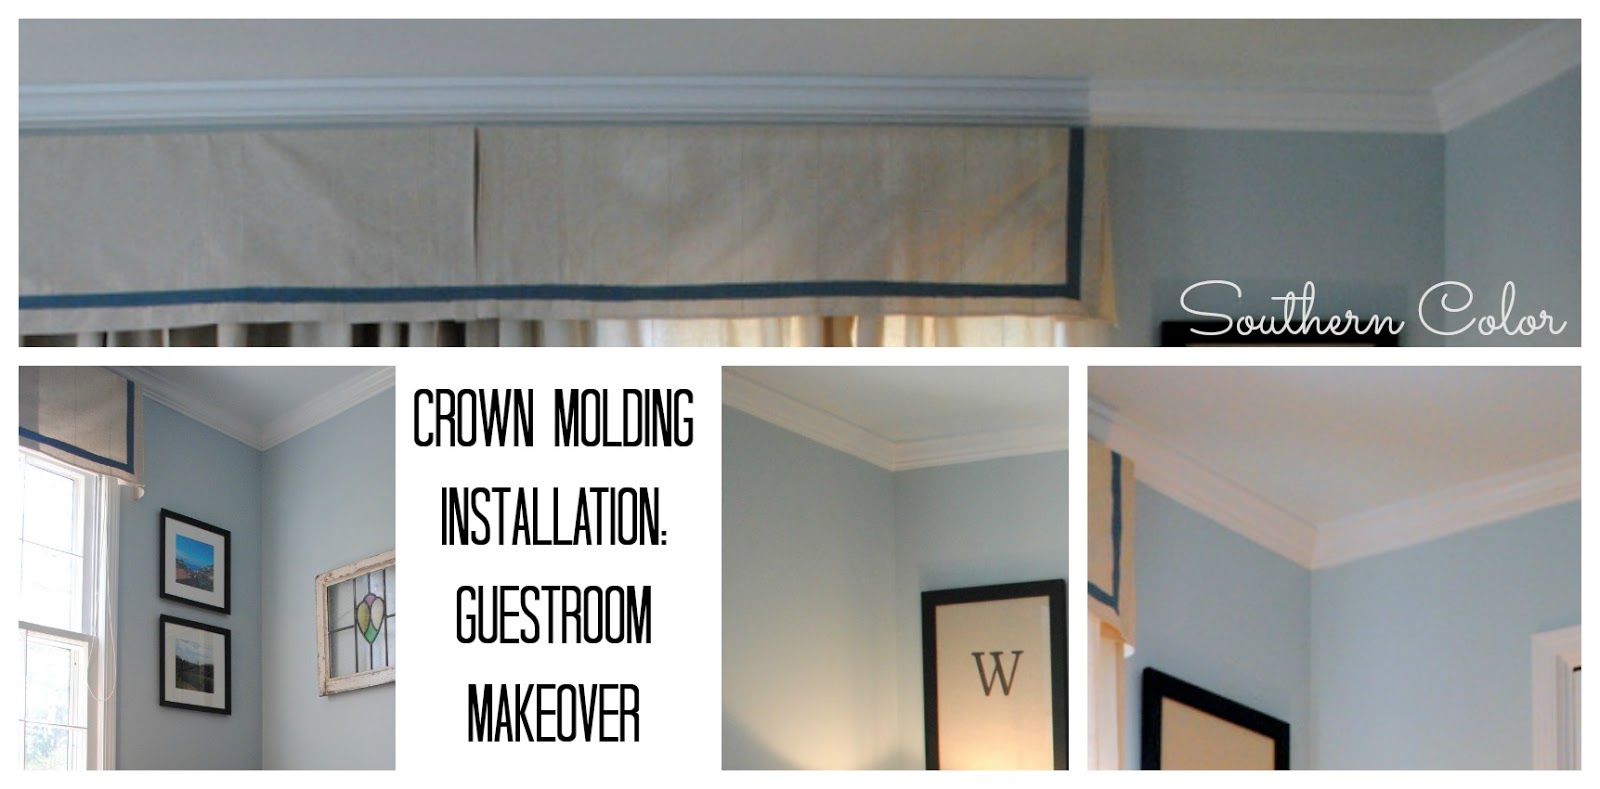 Southern Color Guestroom Makeover Crown Molding